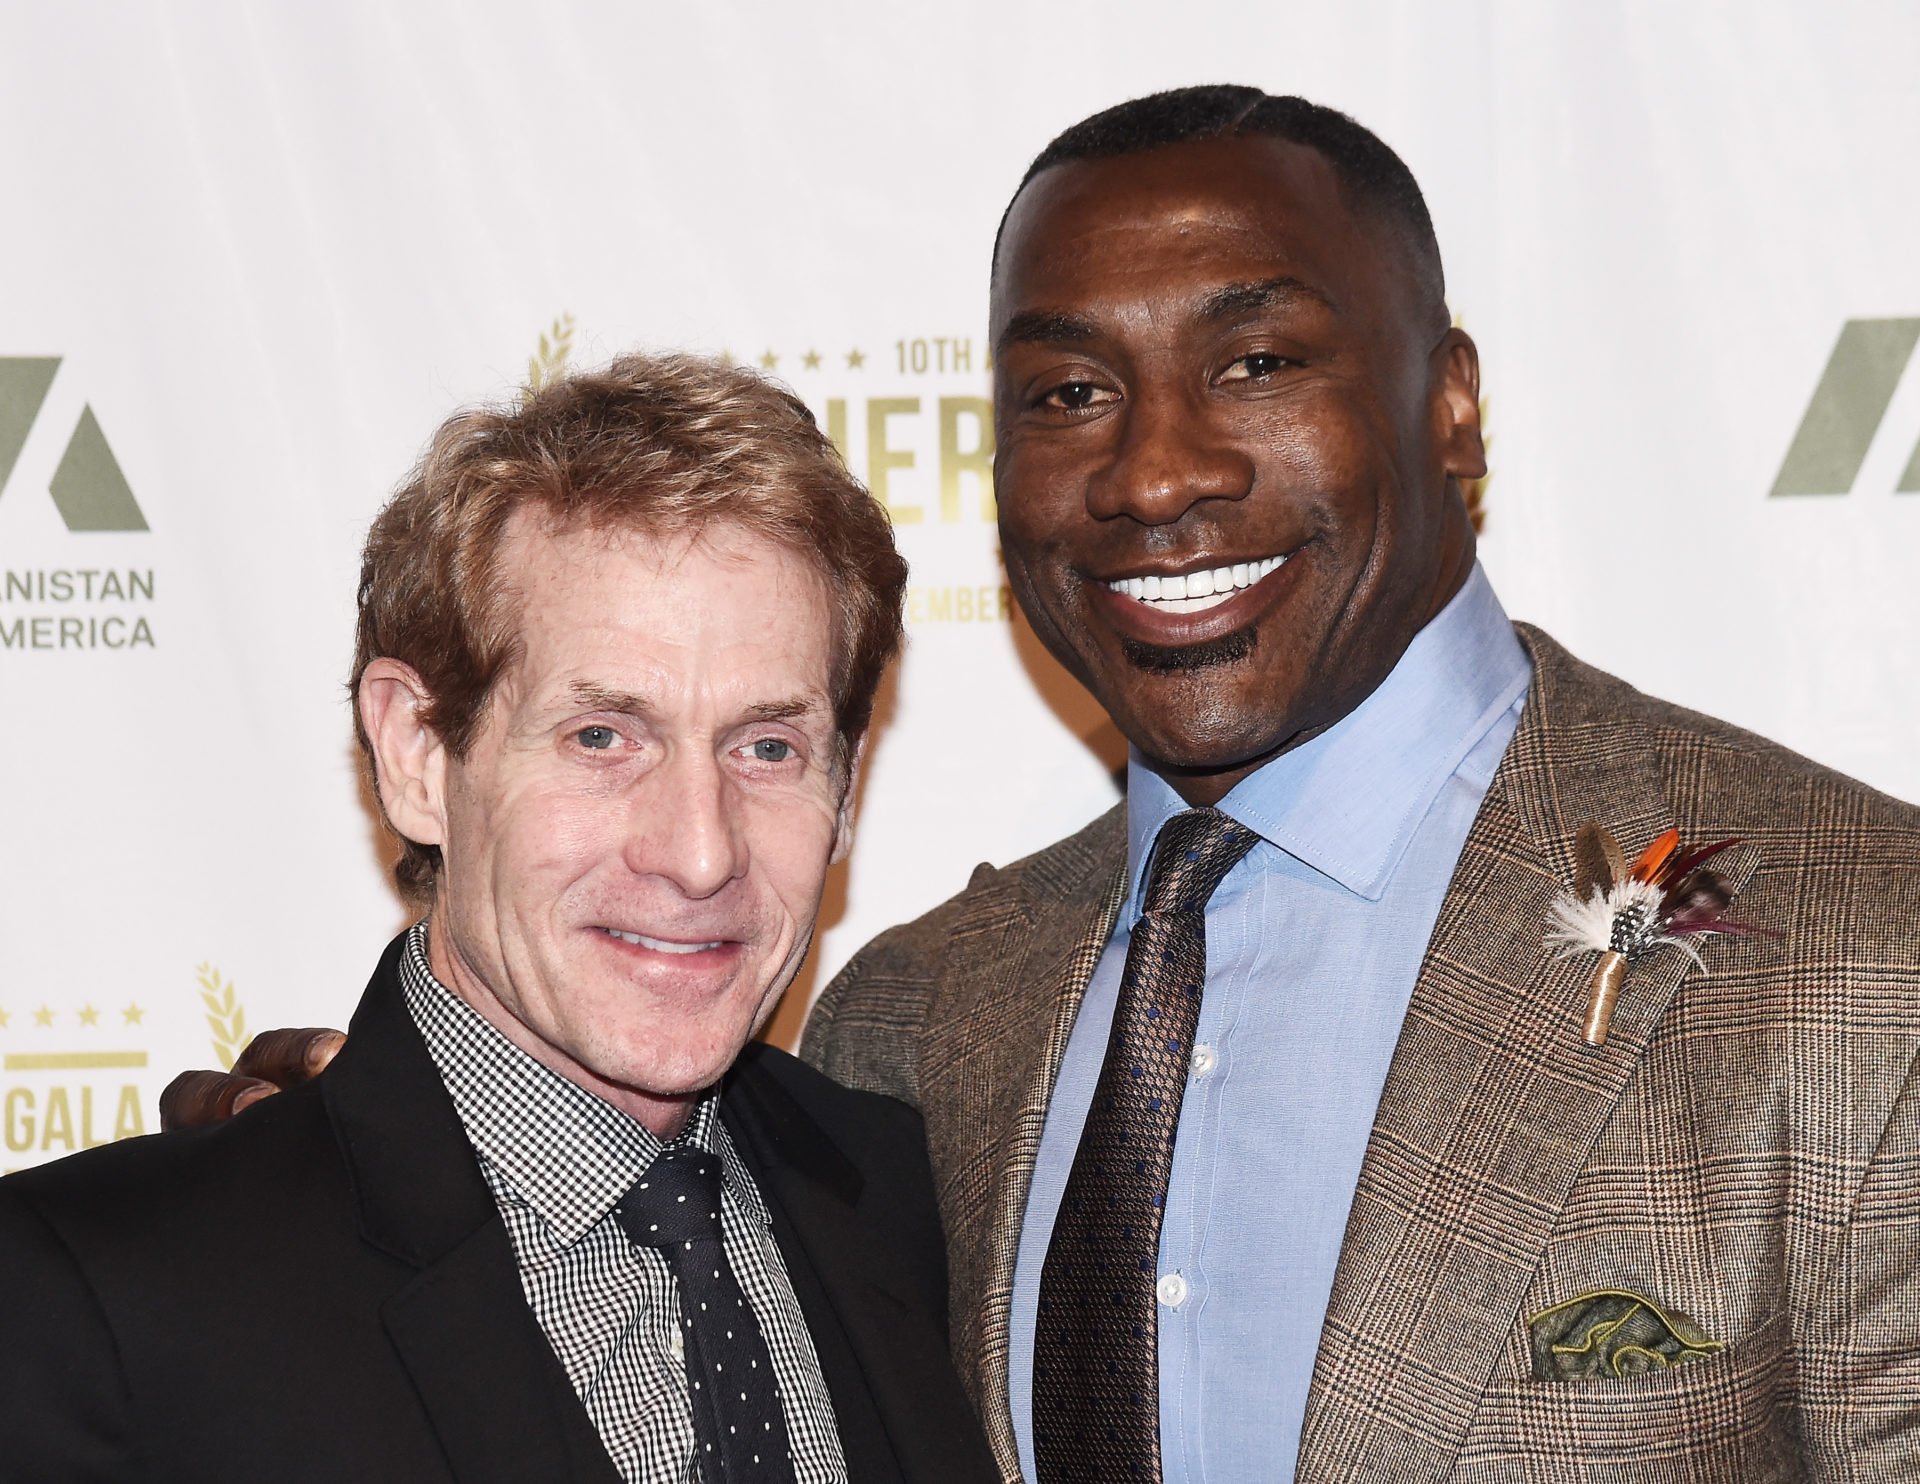 Skip Bayless’ bold NBA Finals prediction trolled by fans on Twitter